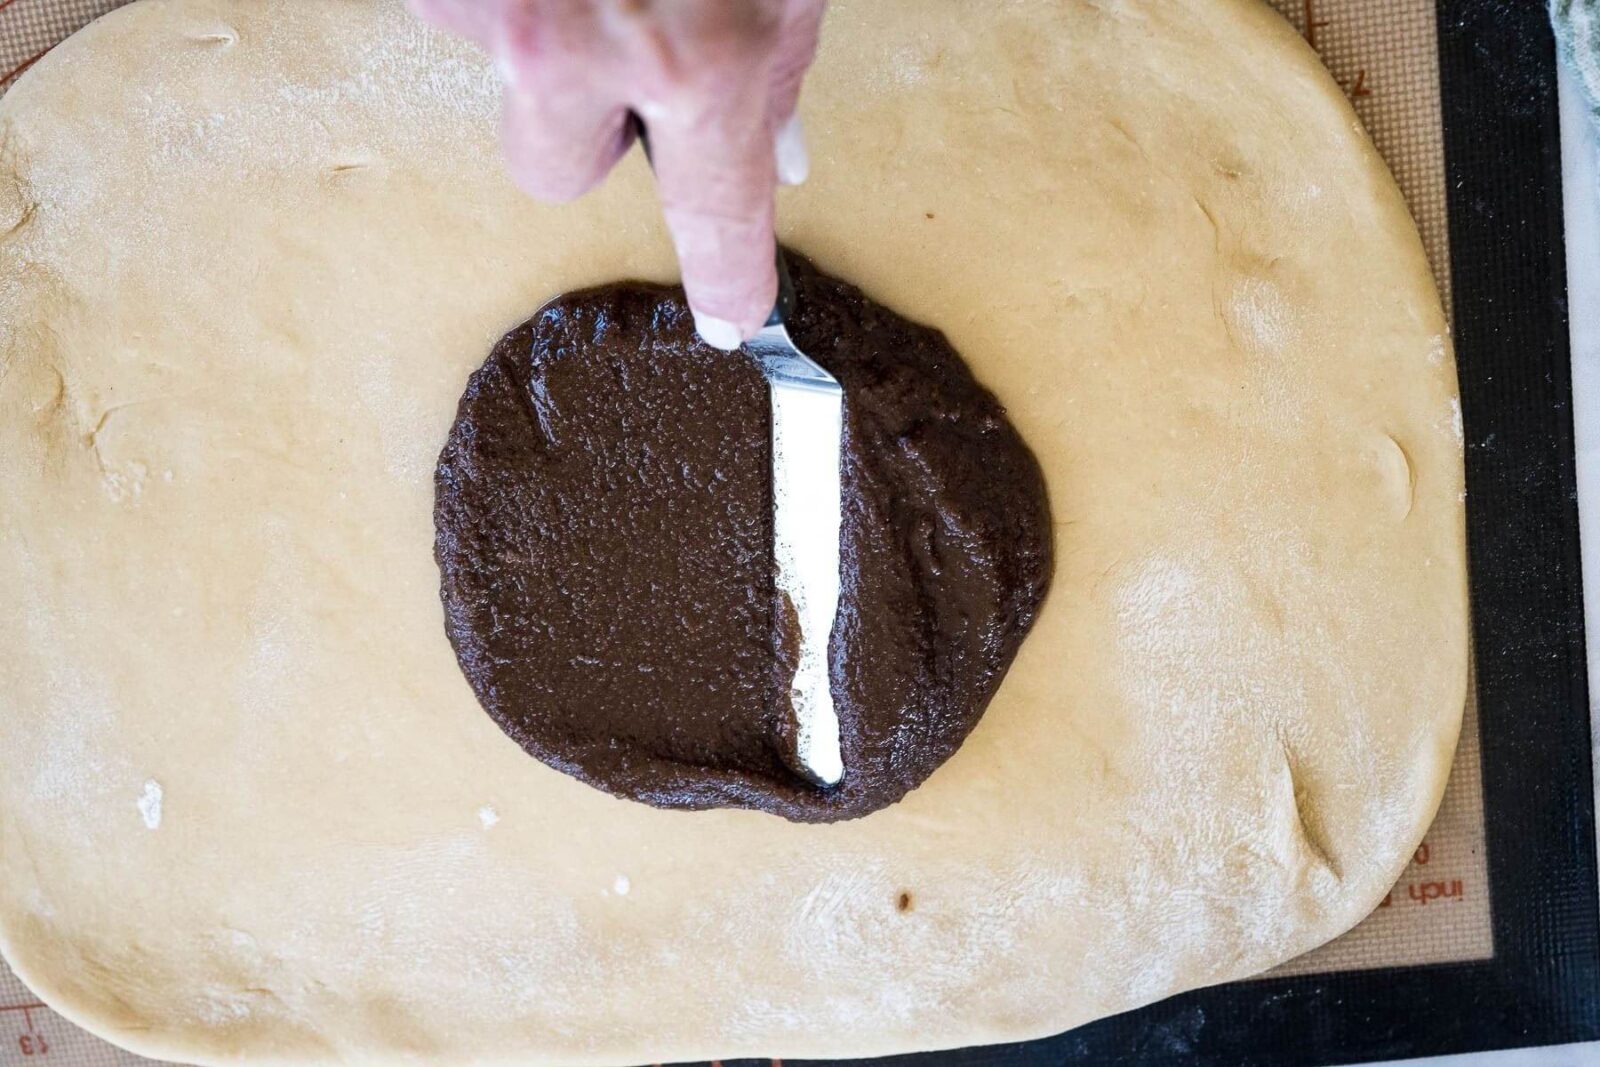 A hand uses a thin metal spatula to start spreading out dark brown cinnamon filling onto dough.